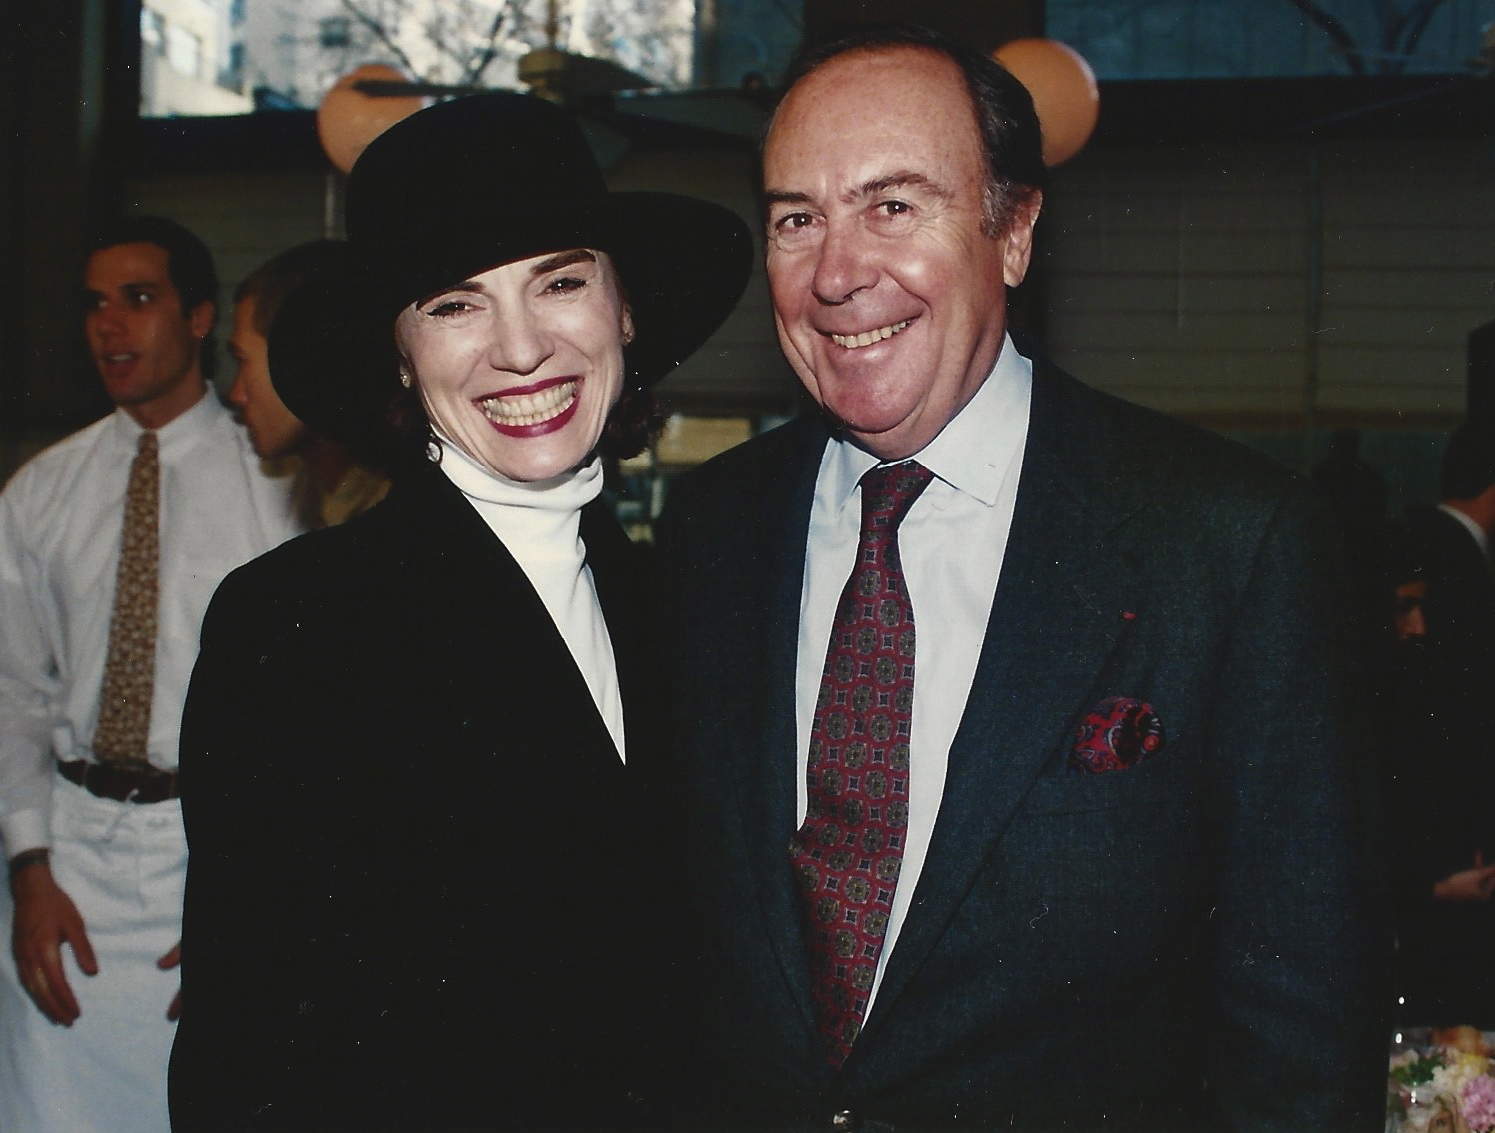 Felicia Milewicz with Guy Peyrelongue, former CEO and President of L'Oréal Paris. 